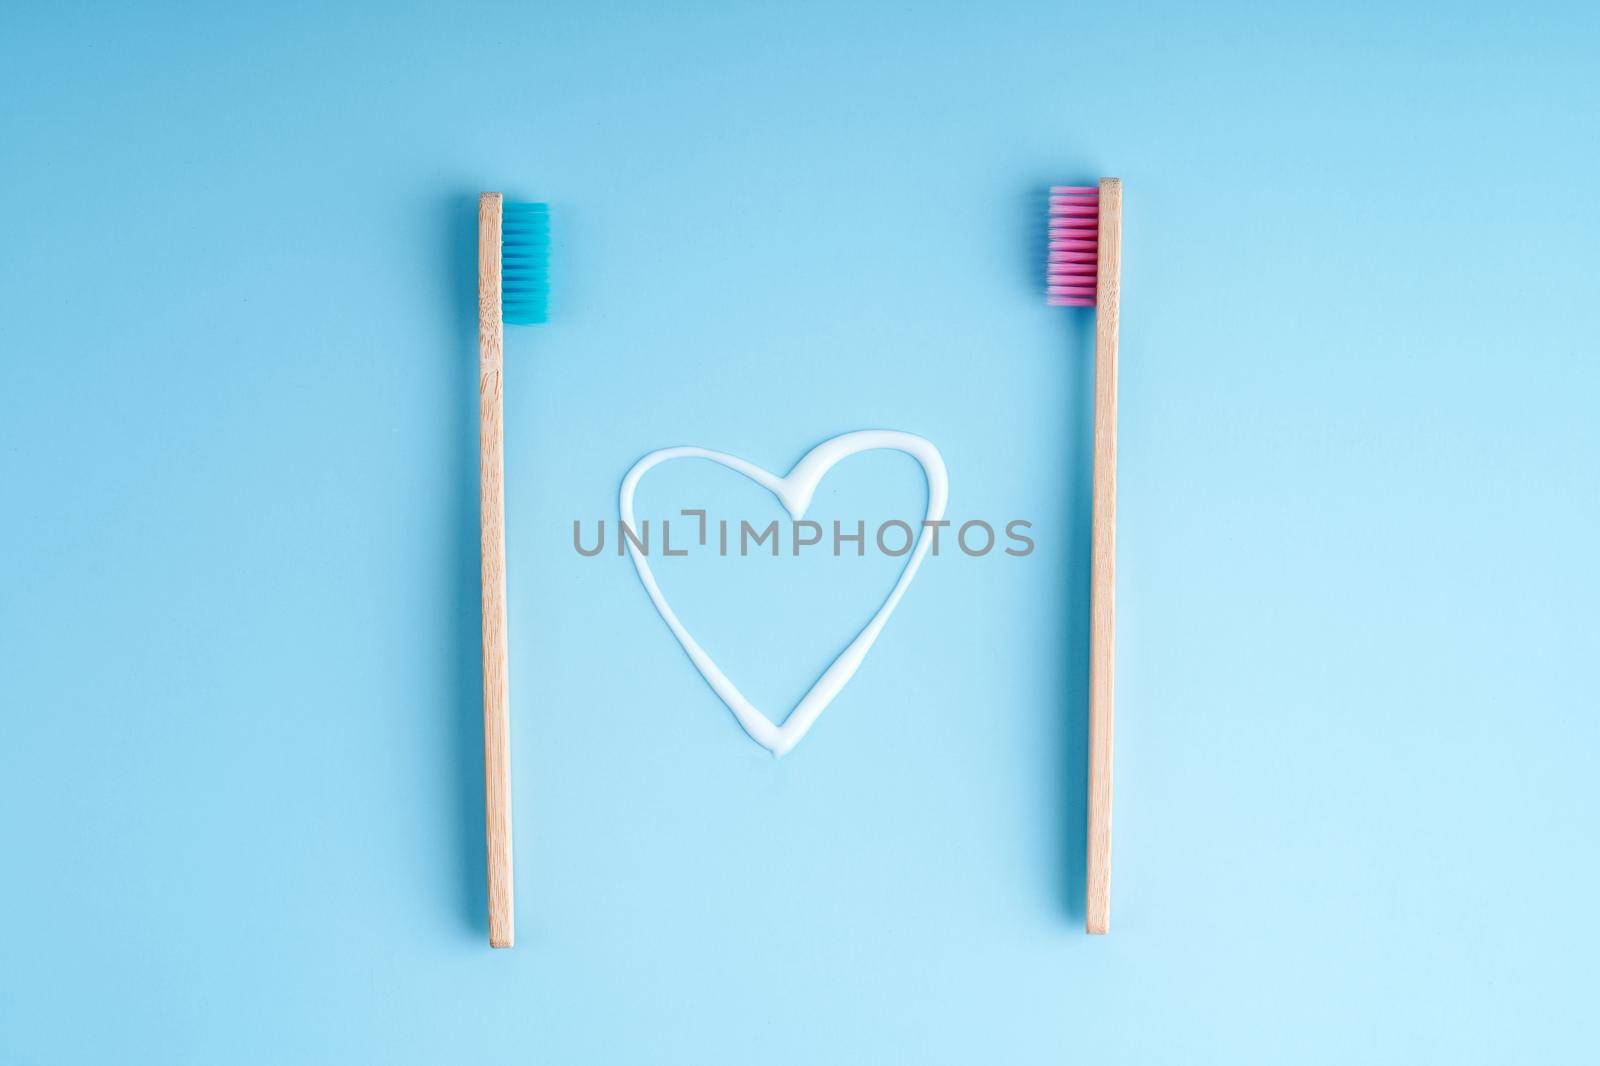 A pair of eco-friendly bamboo toothbrushes. Global environmental trends. Toothbrushes of different genders.